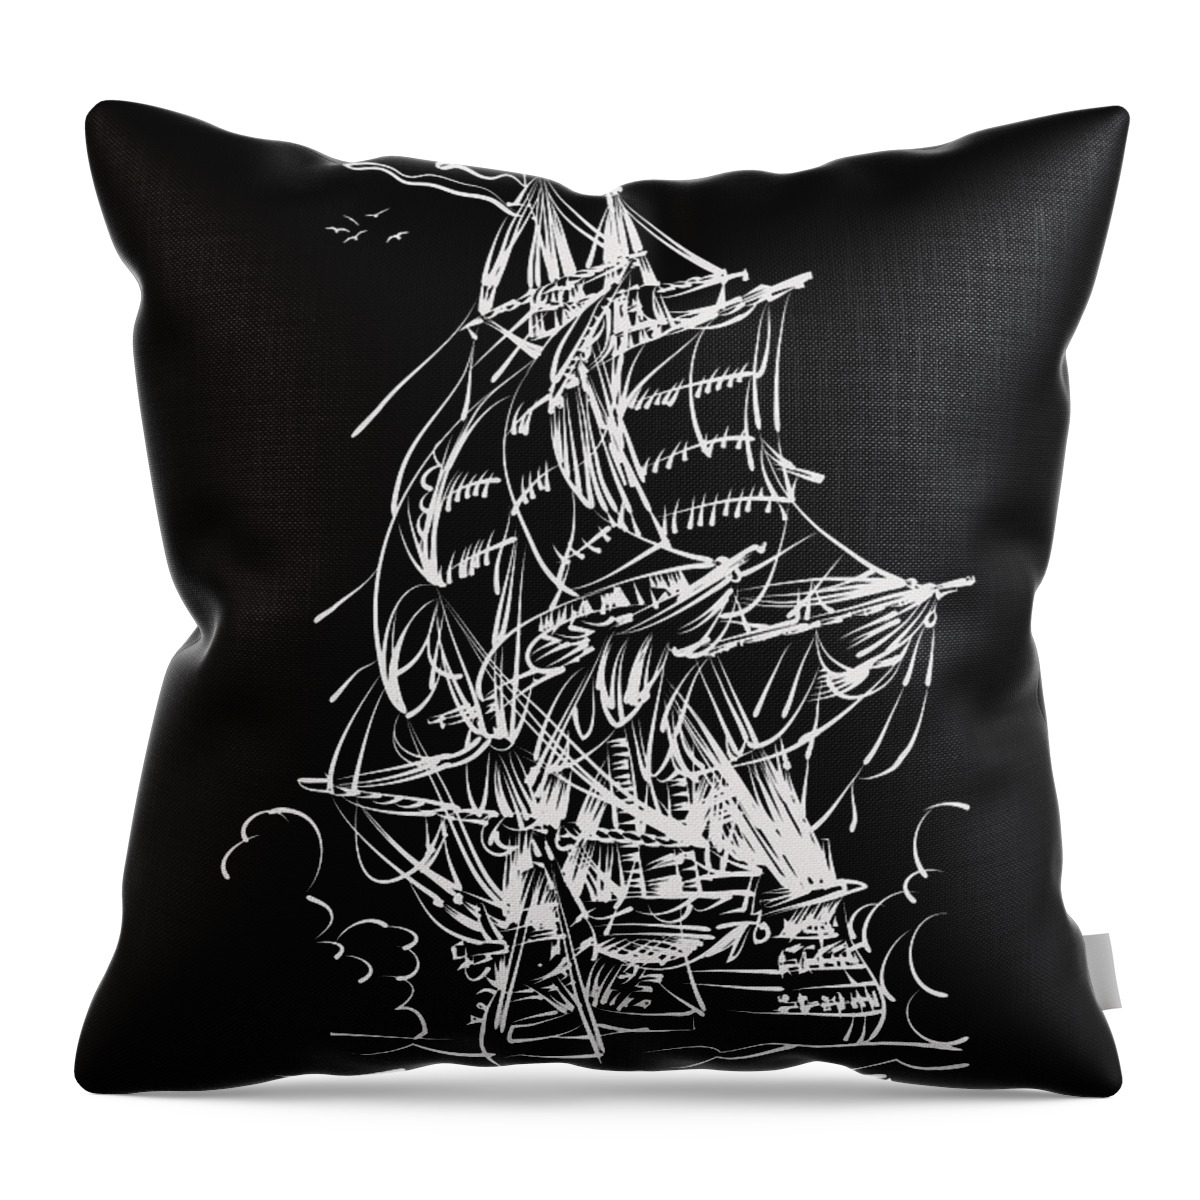 Sailing Throw Pillow featuring the drawing Sailing 1 by Andrzej Szczerski